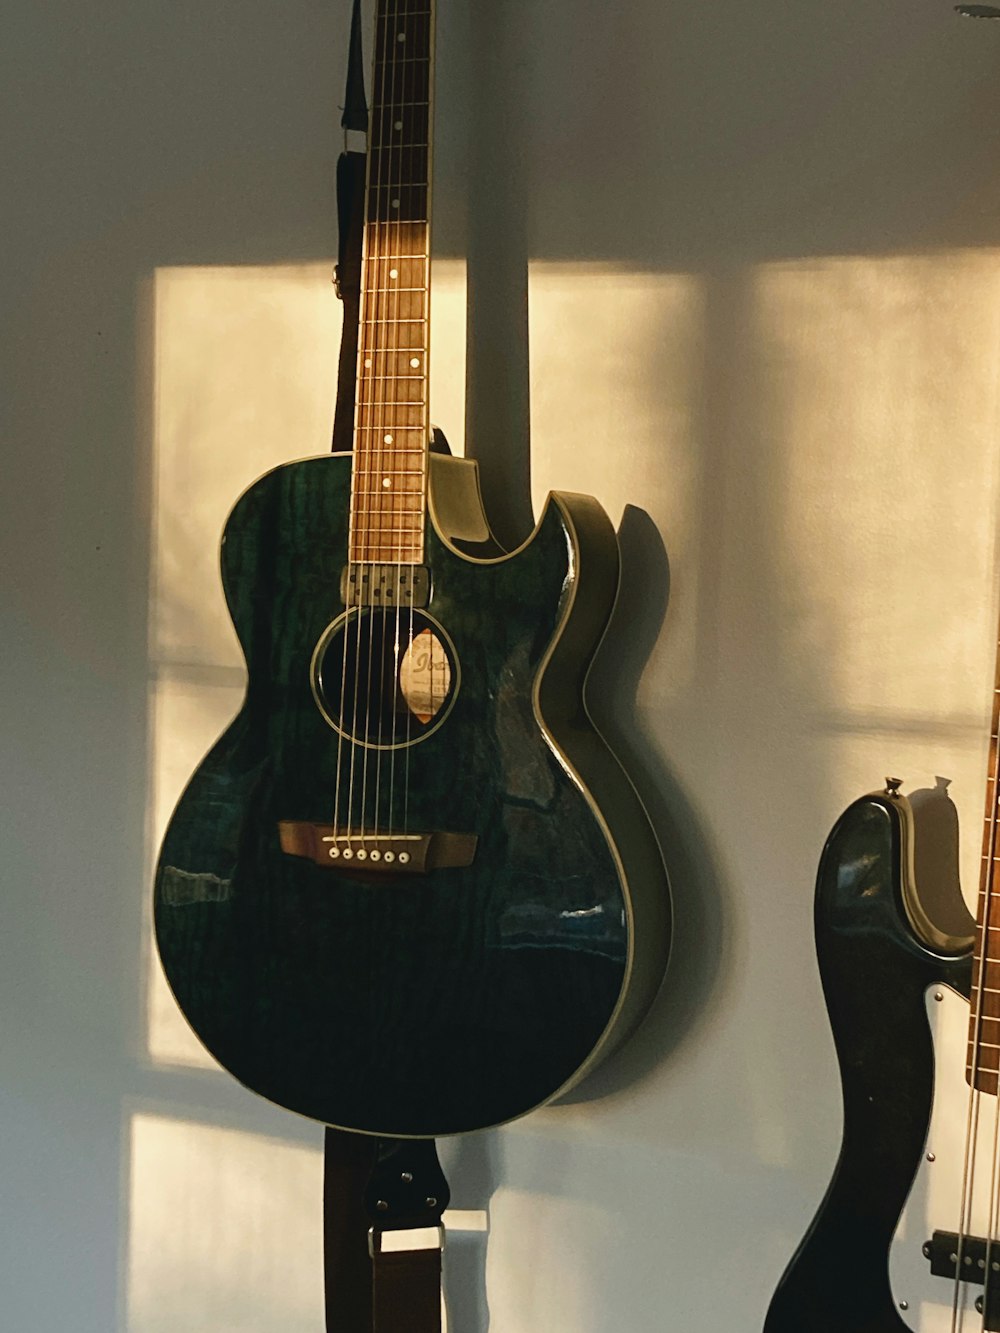 two guitars are hanging on a wall